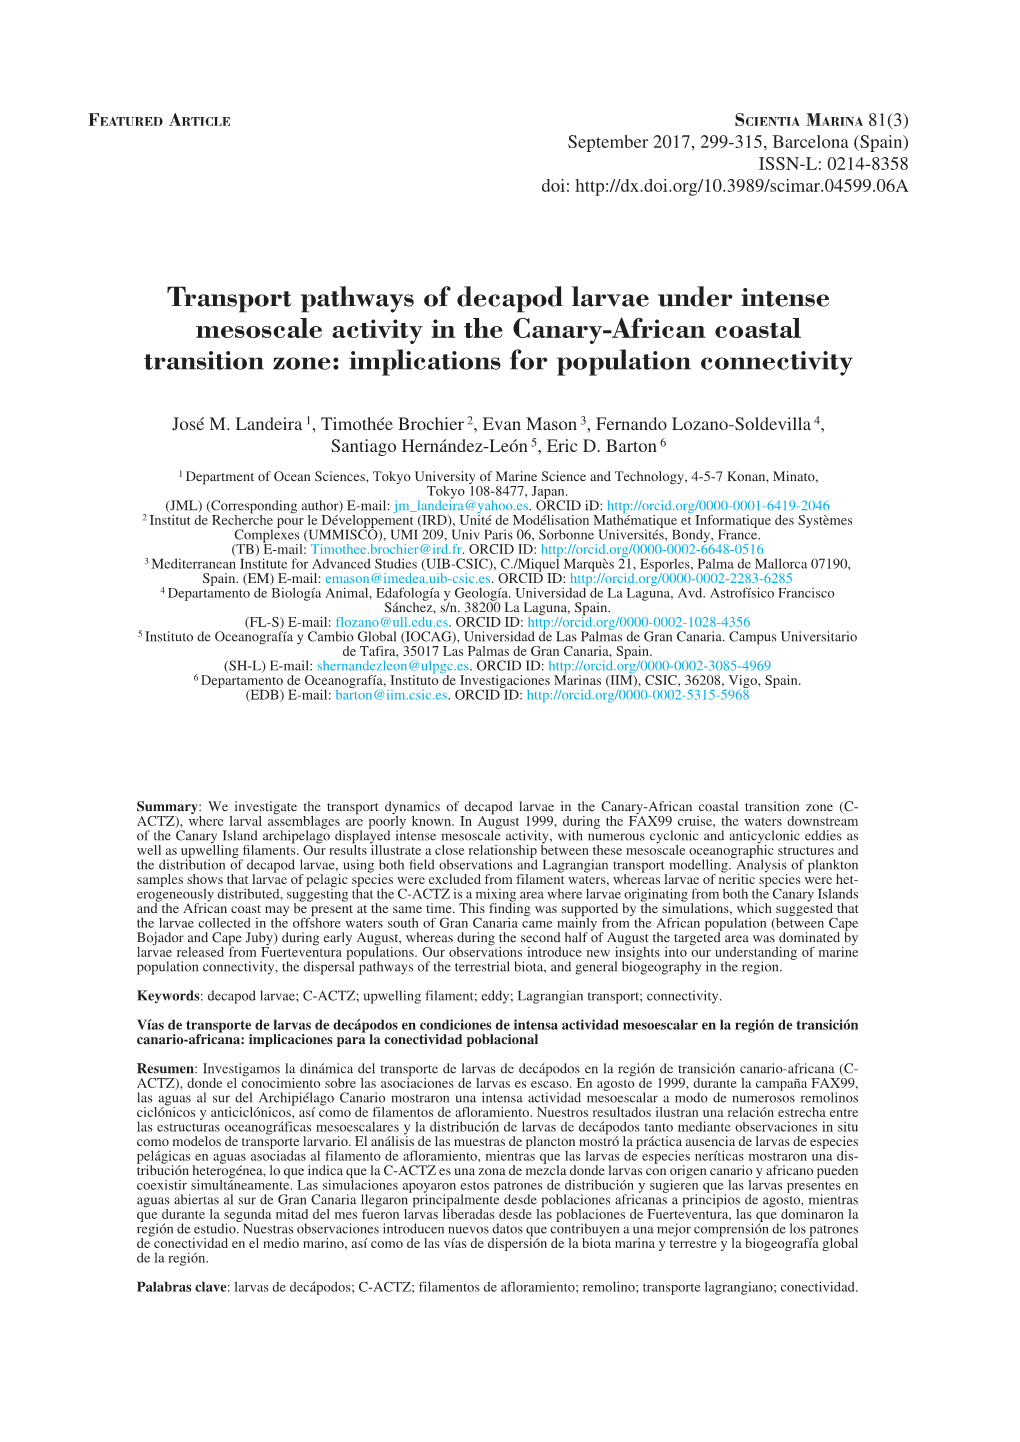 Transport Pathways of Decapod Larvae Under Intense Mesoscale Activity in the Canary-African Coastal Transition Zone: Implications for Population Connectivity